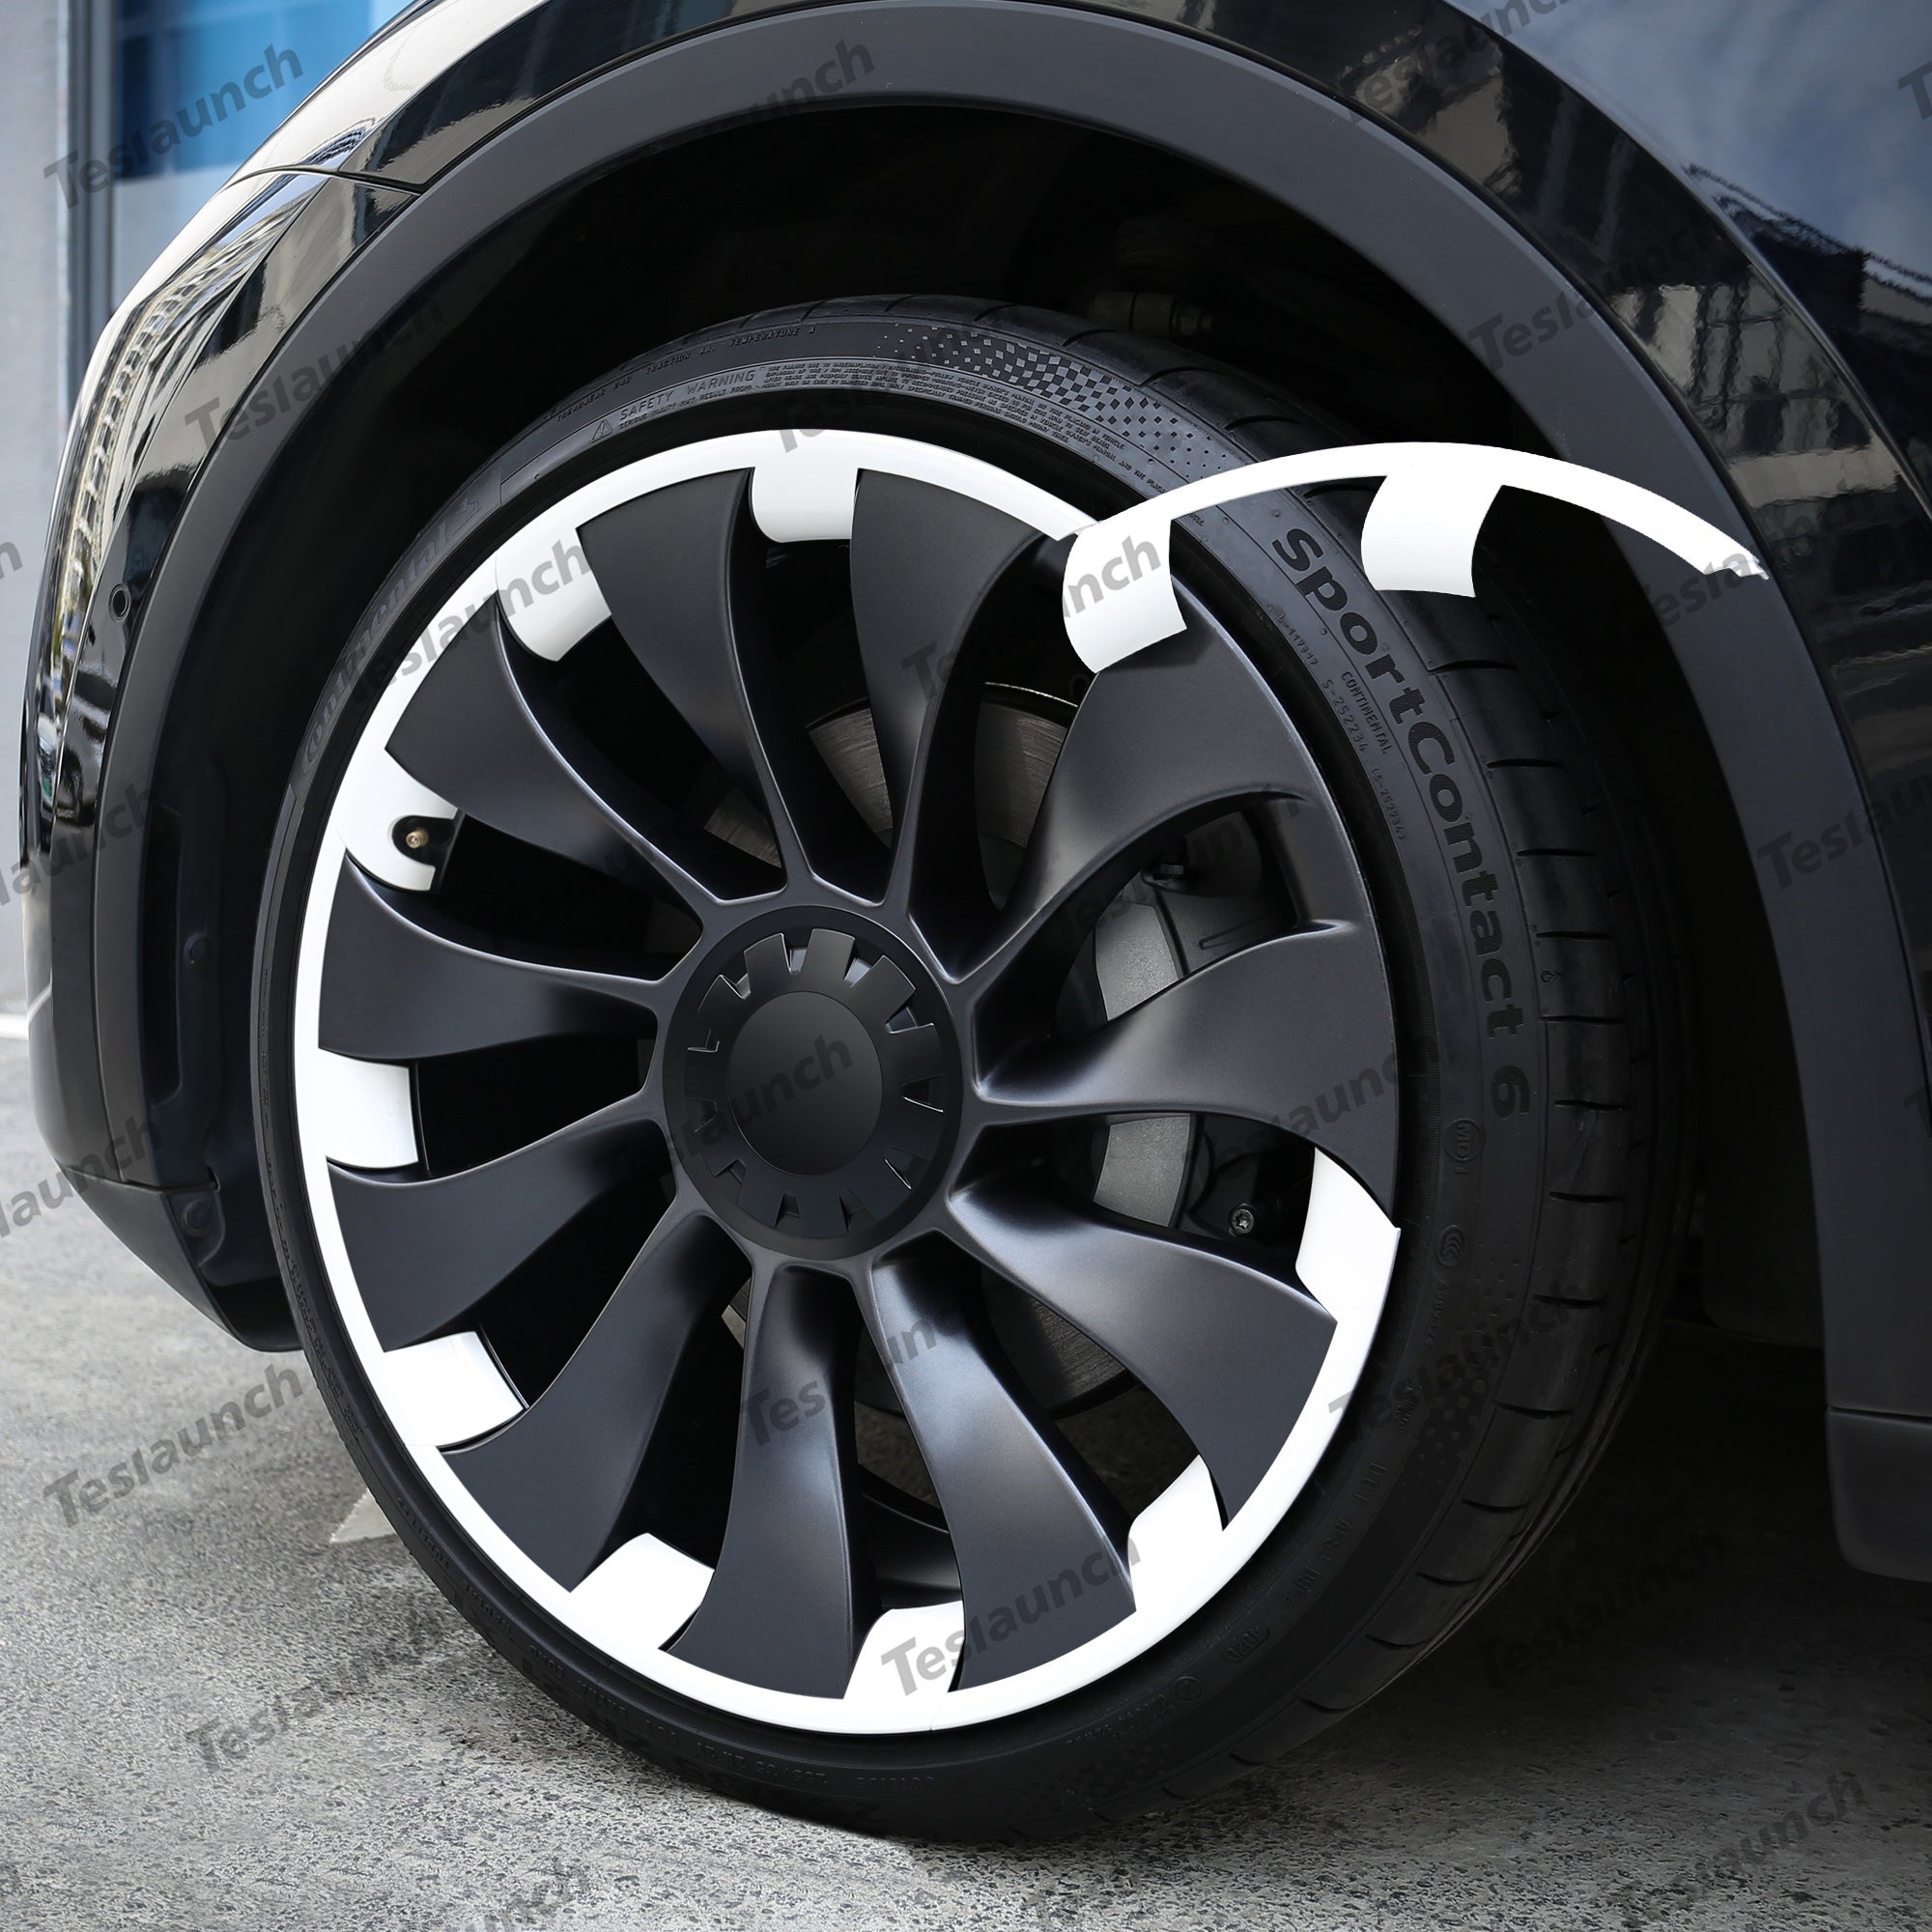 Model Y Rim Protector For 21'' Uberturbine Wheel Ultimate Protection Refreshed Wheels(4 Pack)